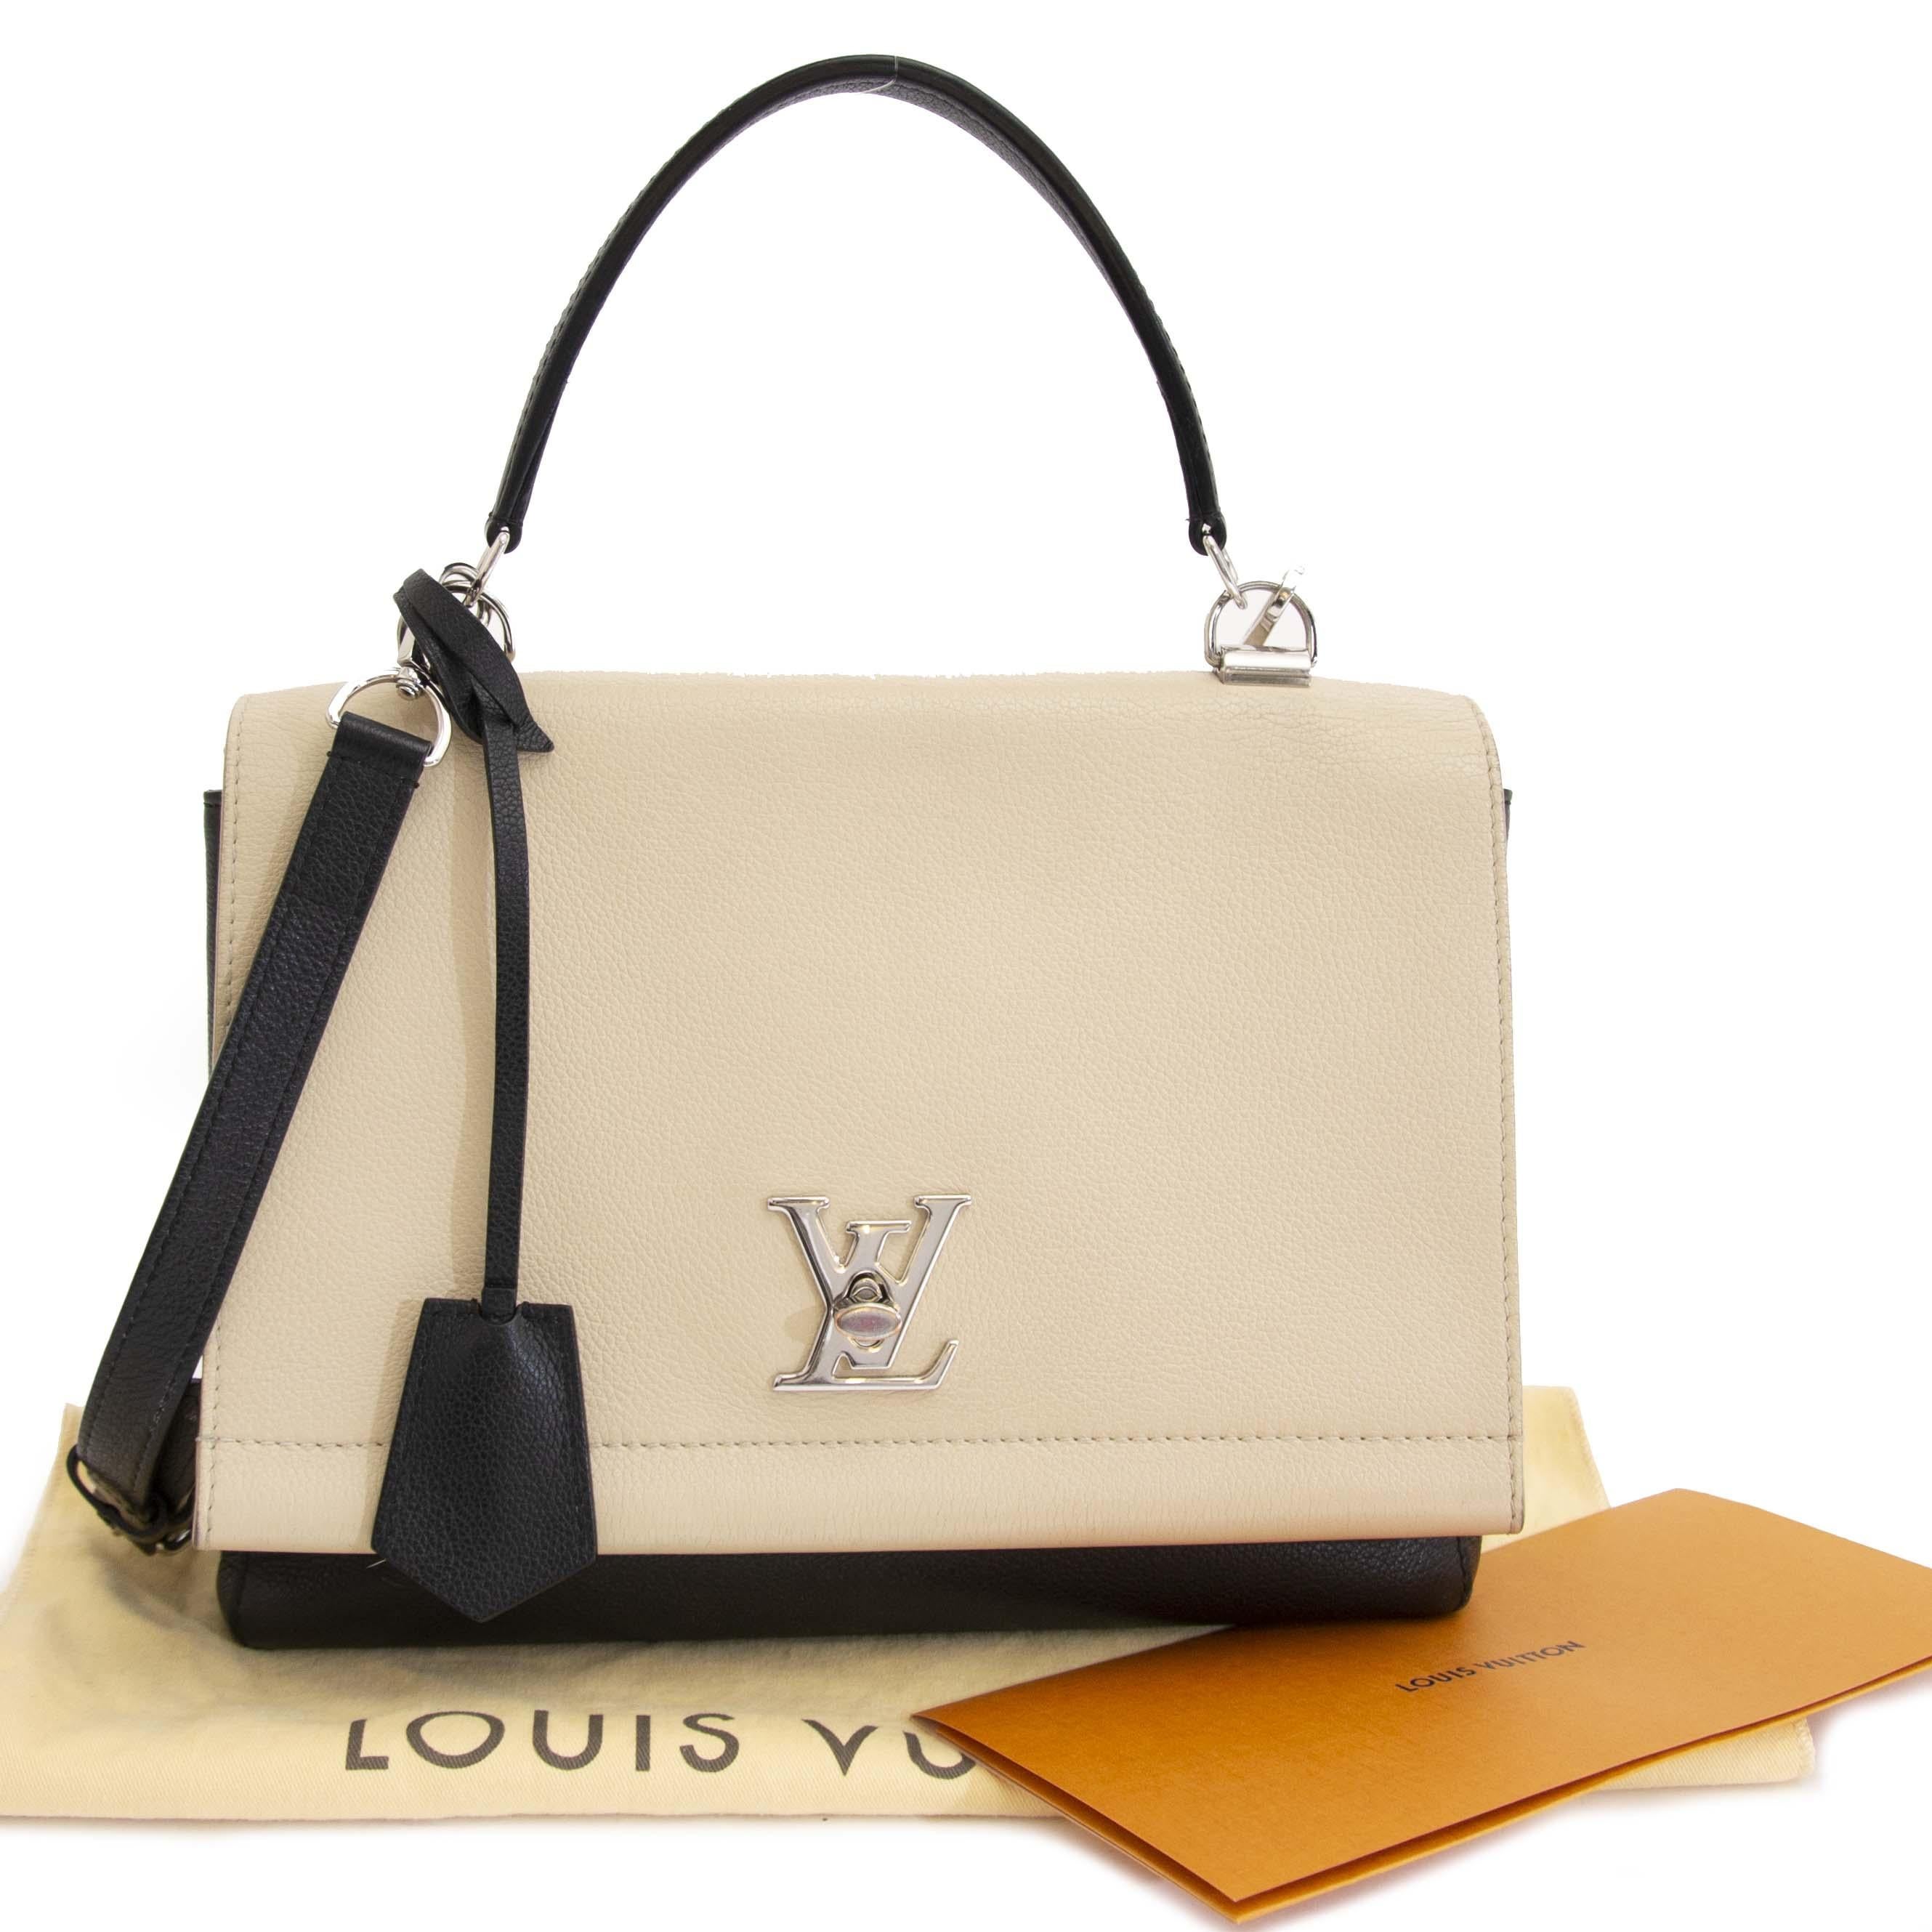 Very good condition

Louis Vuitton Bicolor Lockme Noir Vanille Shoulder Bag

Never out of style with this timeless Louis Vuitton Bicolor Lockme Noir Vanille Shoulder Bag. 
This chic and compact handbag is crafted of grained calfskin leather in black